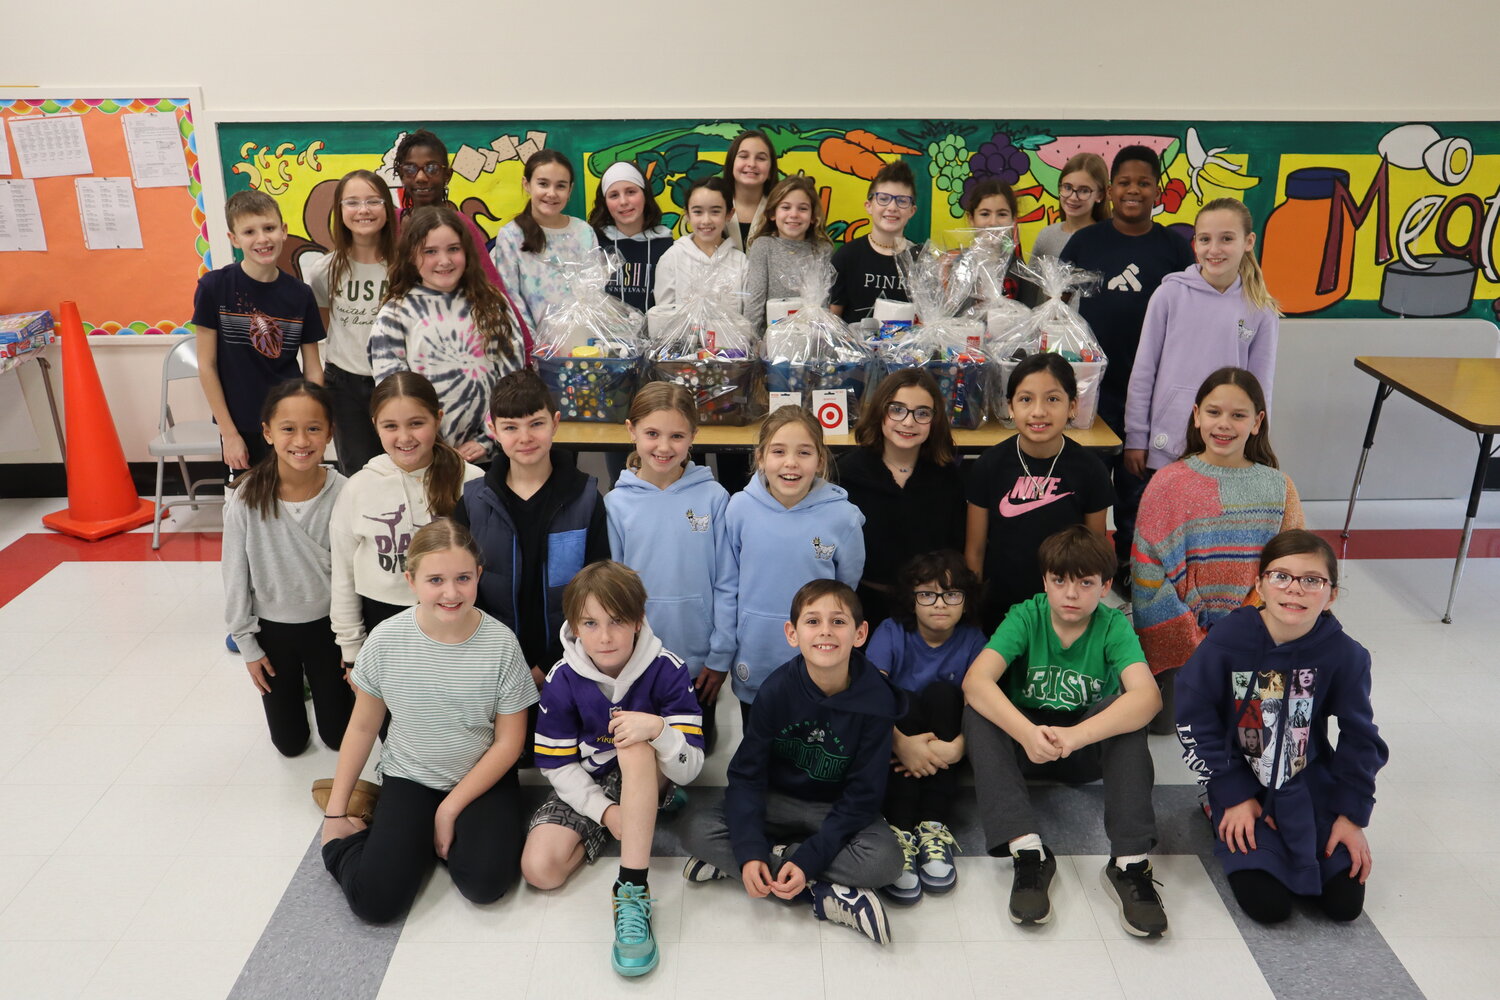 The West End Elementary School student council raised funds to purchase goods in support of the Ronald McDonald House of Long Island.